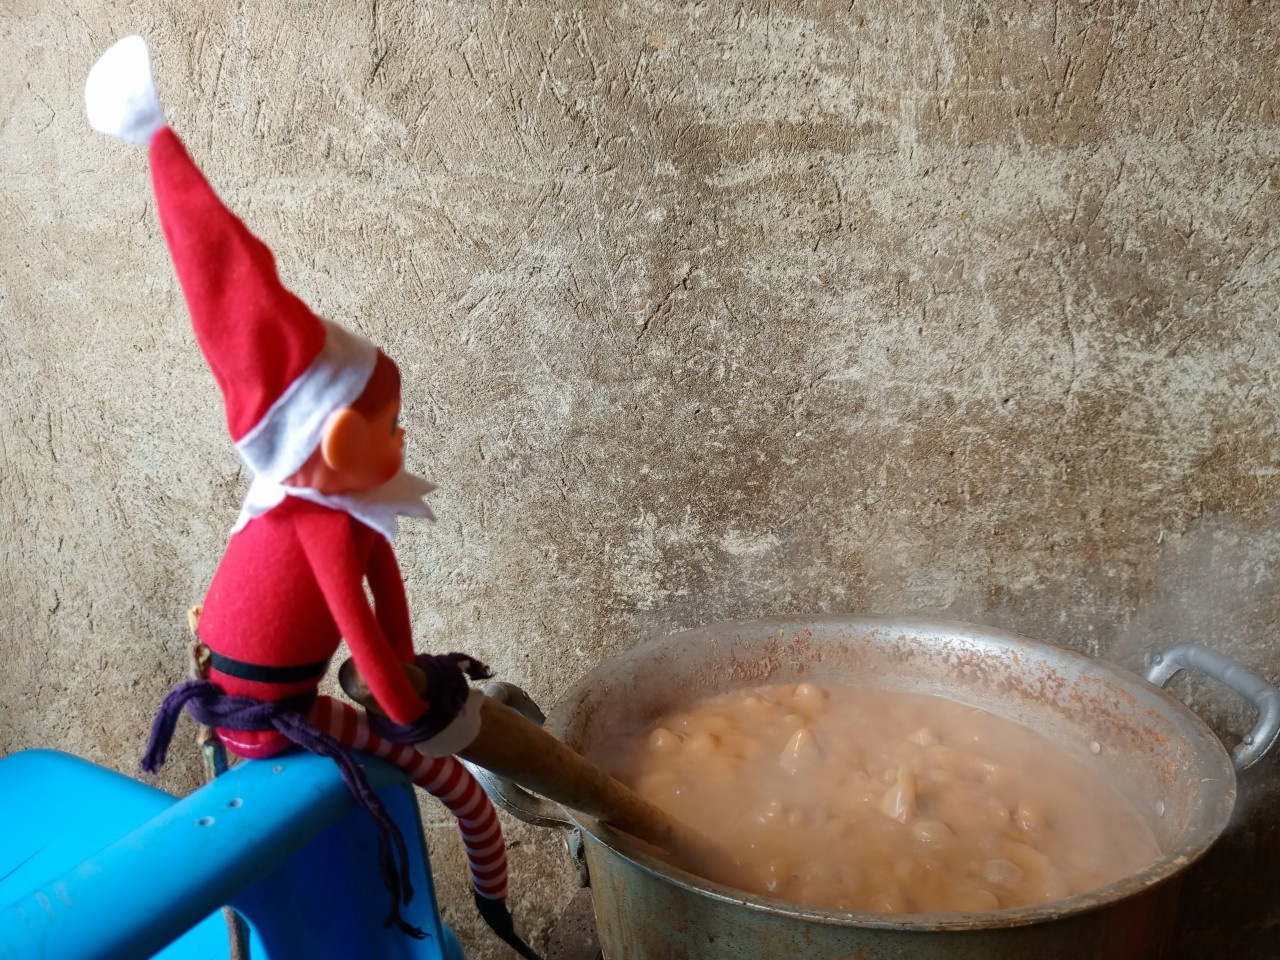 An elf toy mixing a bubbling pot of food